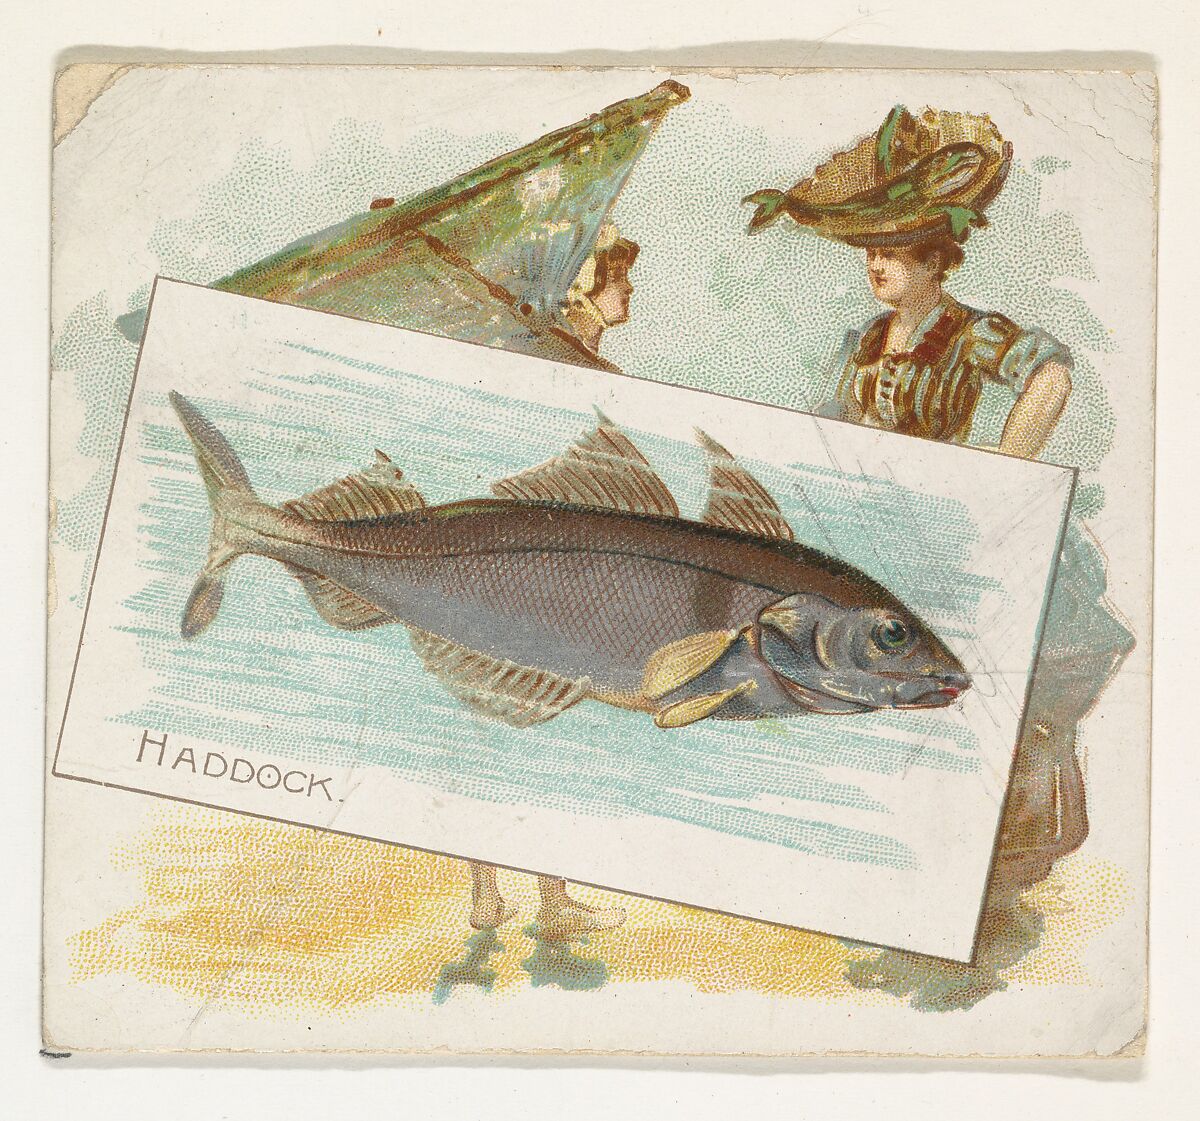 Haddock, from Fish from American Waters series (N39) for Allen & Ginter Cigarettes, Issued by Allen &amp; Ginter (American, Richmond, Virginia), Commercial color lithograph 